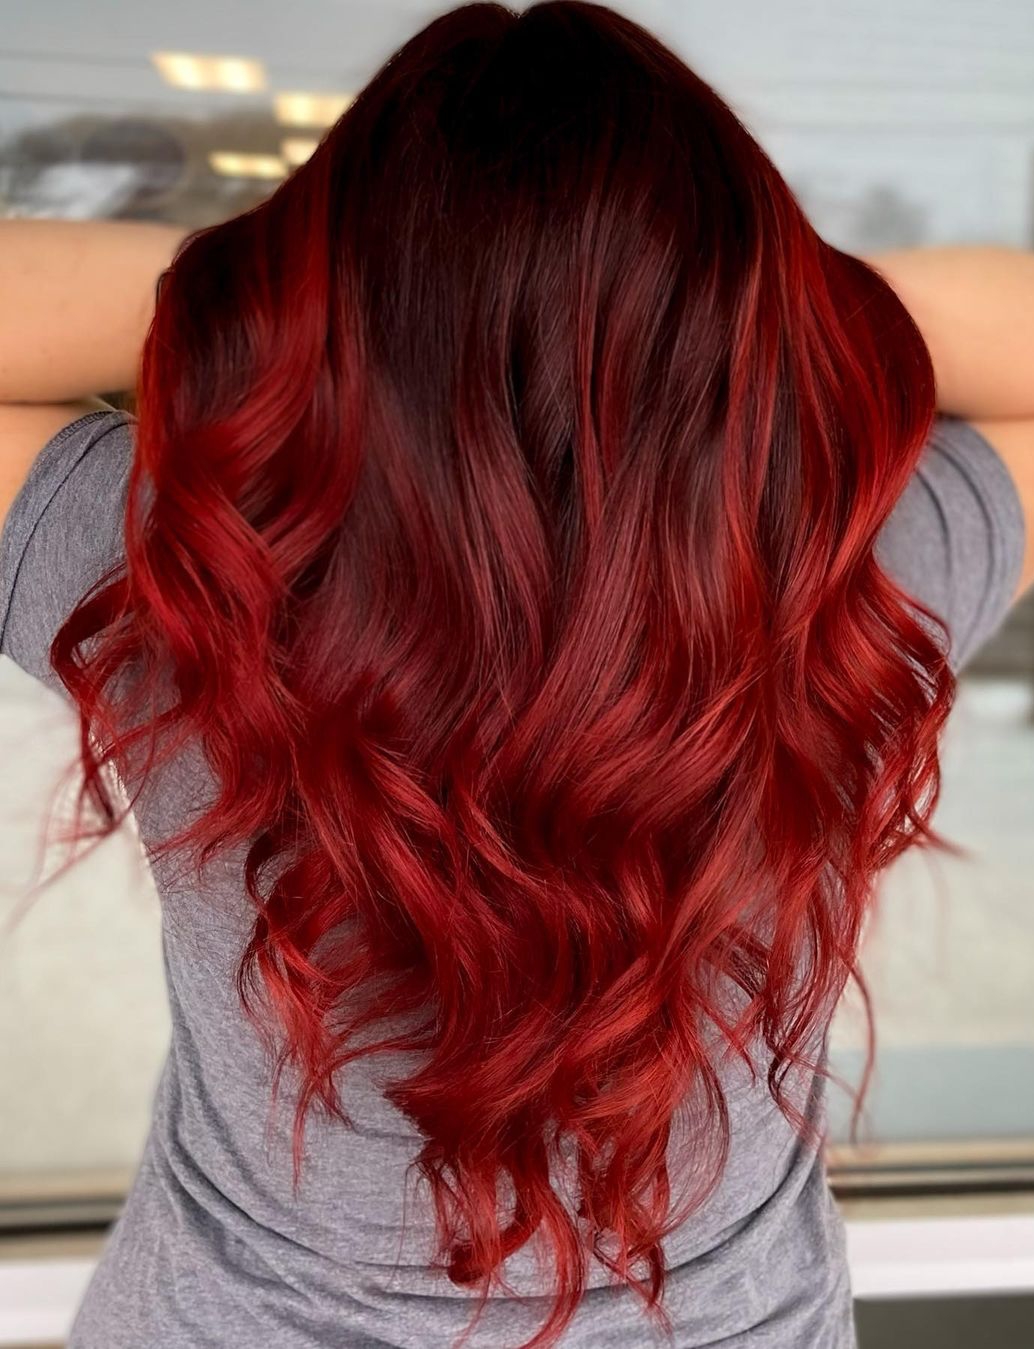 Long Wavy Red Hair with Darker Roots